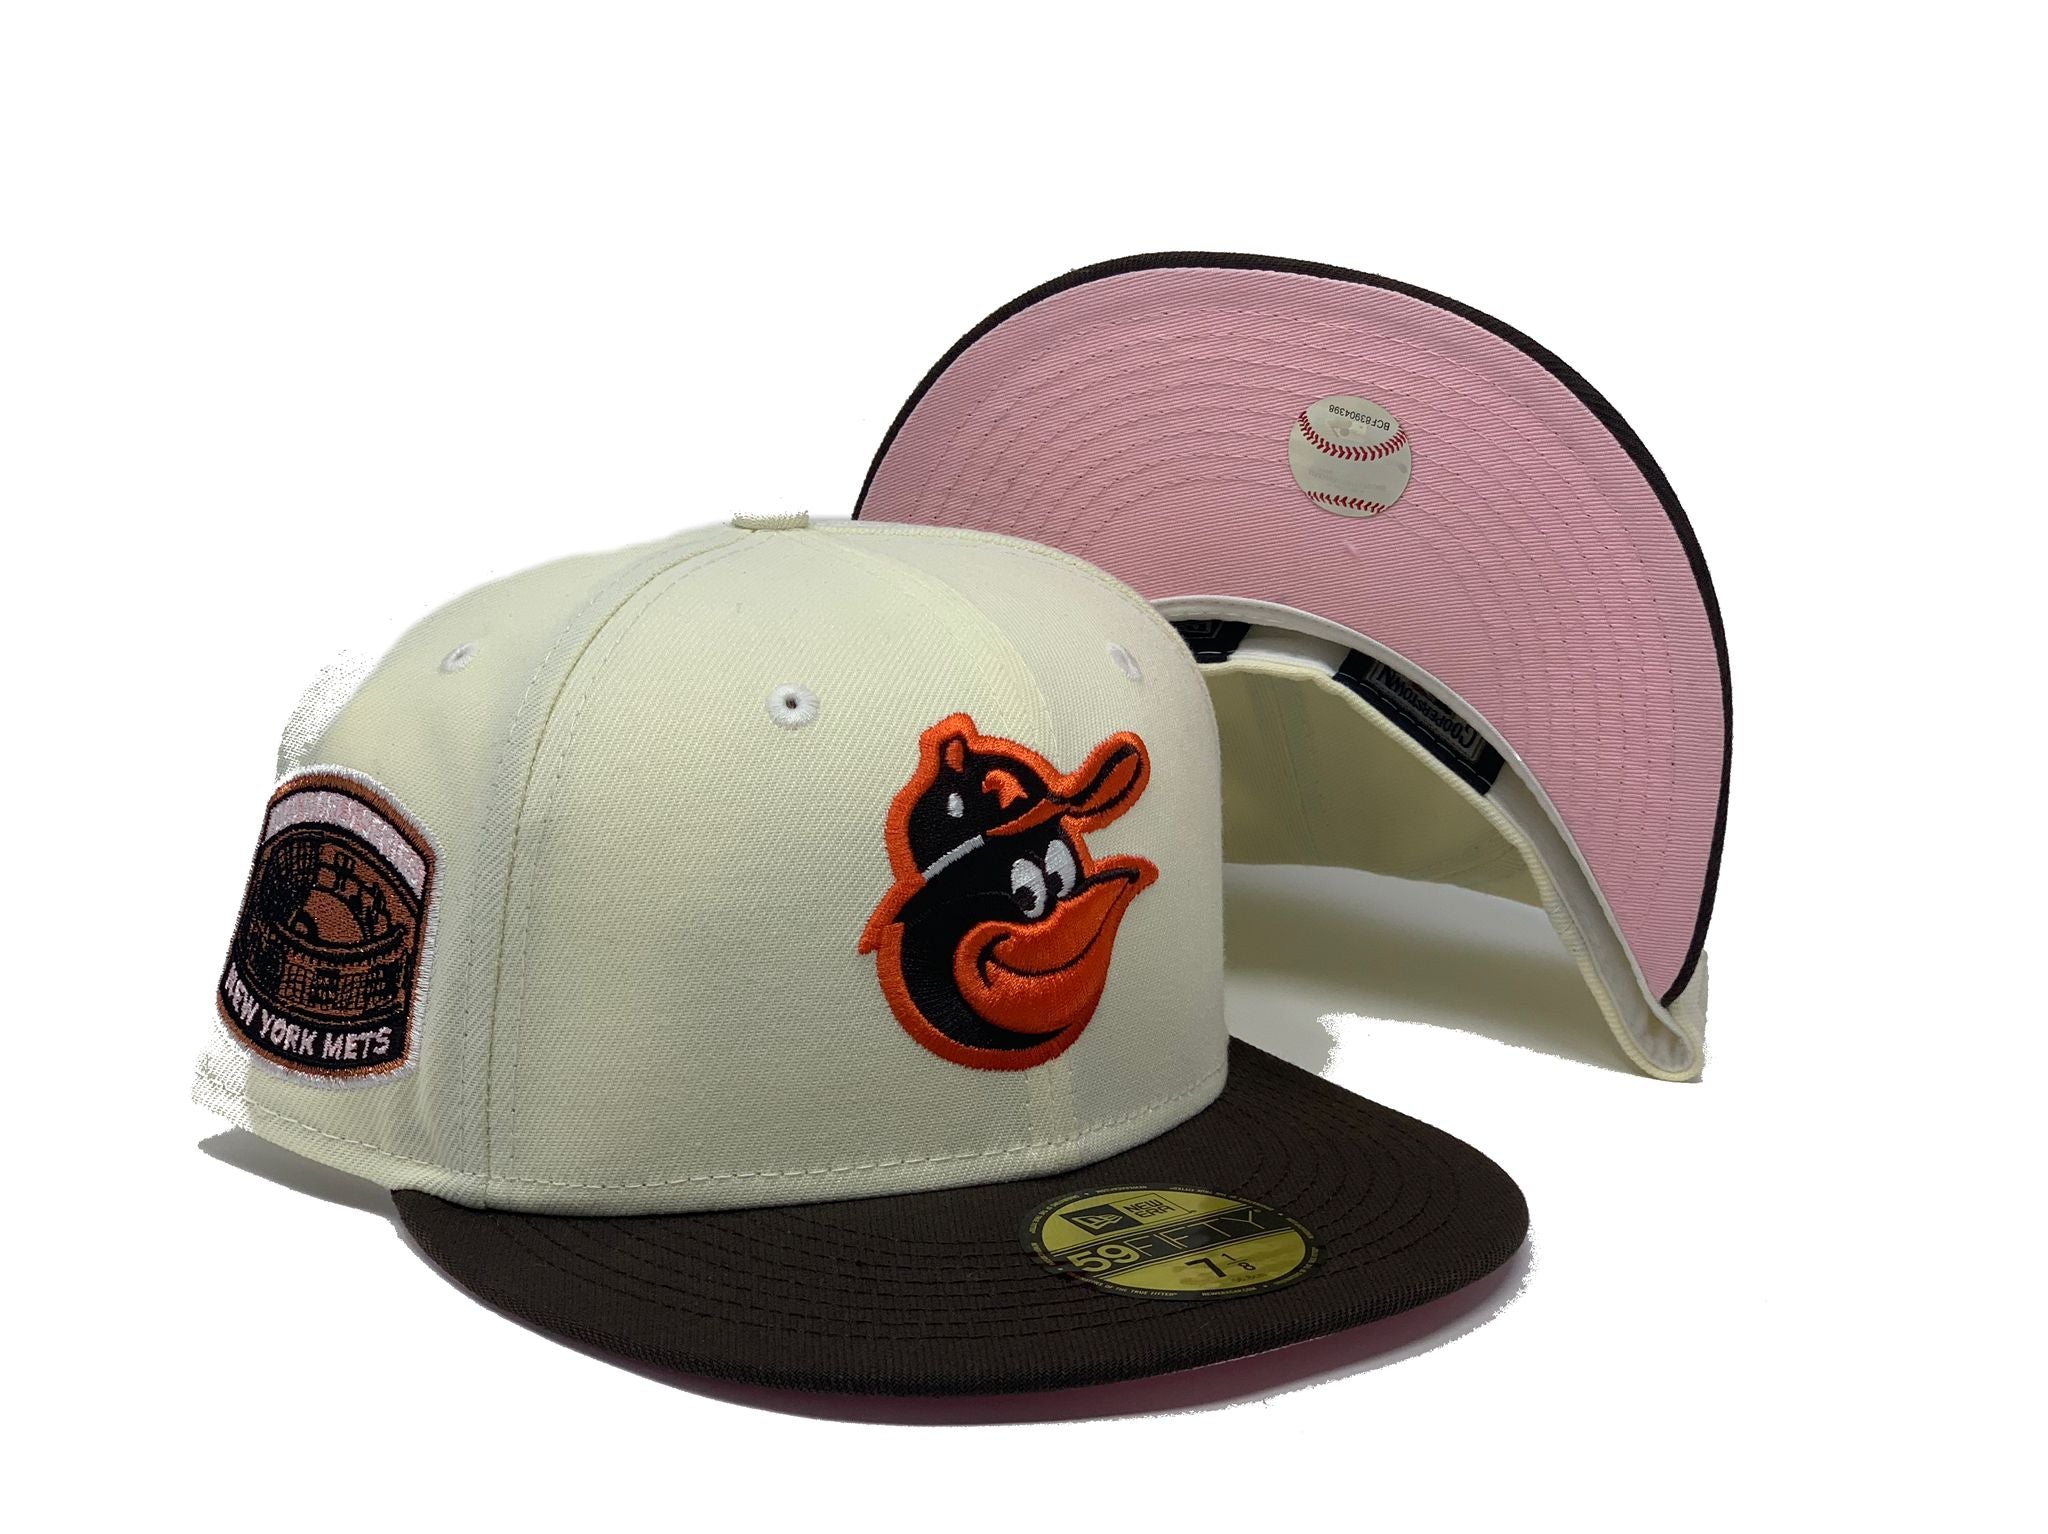 Baltimore Orioles Cooperstown Mitchell & Ness MLB Baseball Snapback Hat Cap